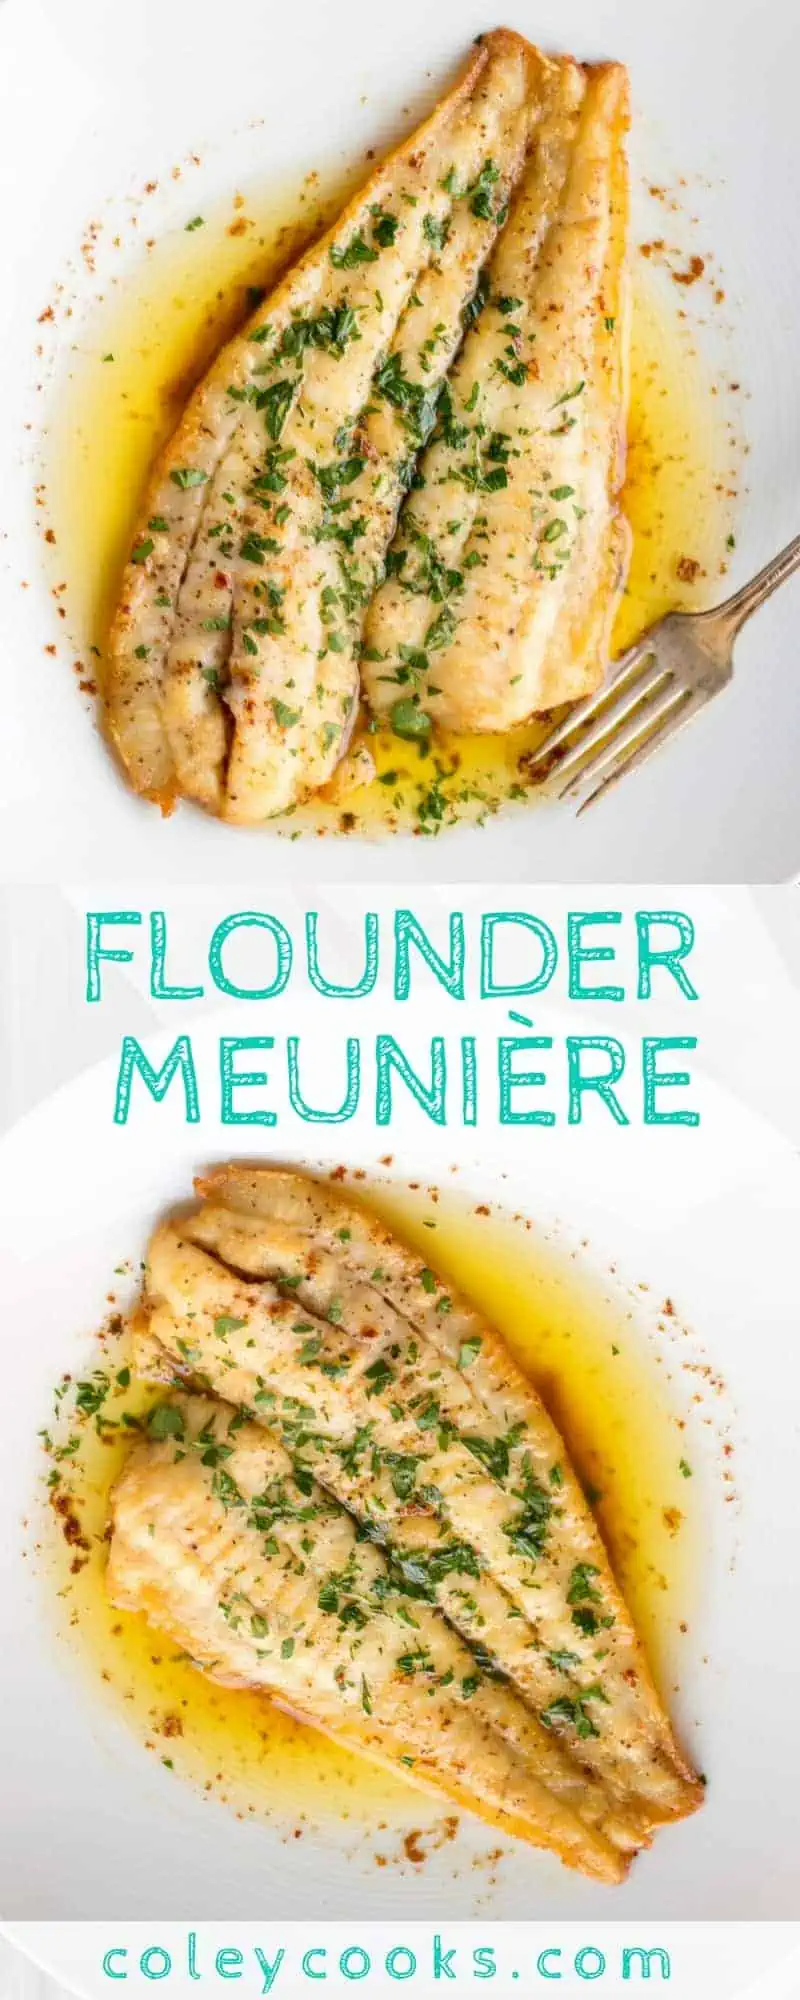 FLOUNDER MEUNIÈRE | Easiest ever fish recipe! This classic French recipe is so simple and so delicious. Ready in under 10 minutes for a quick and easy seafood dinner. Lemon, brown butter, best easy fish recipe ever! | ColeyCooks.com